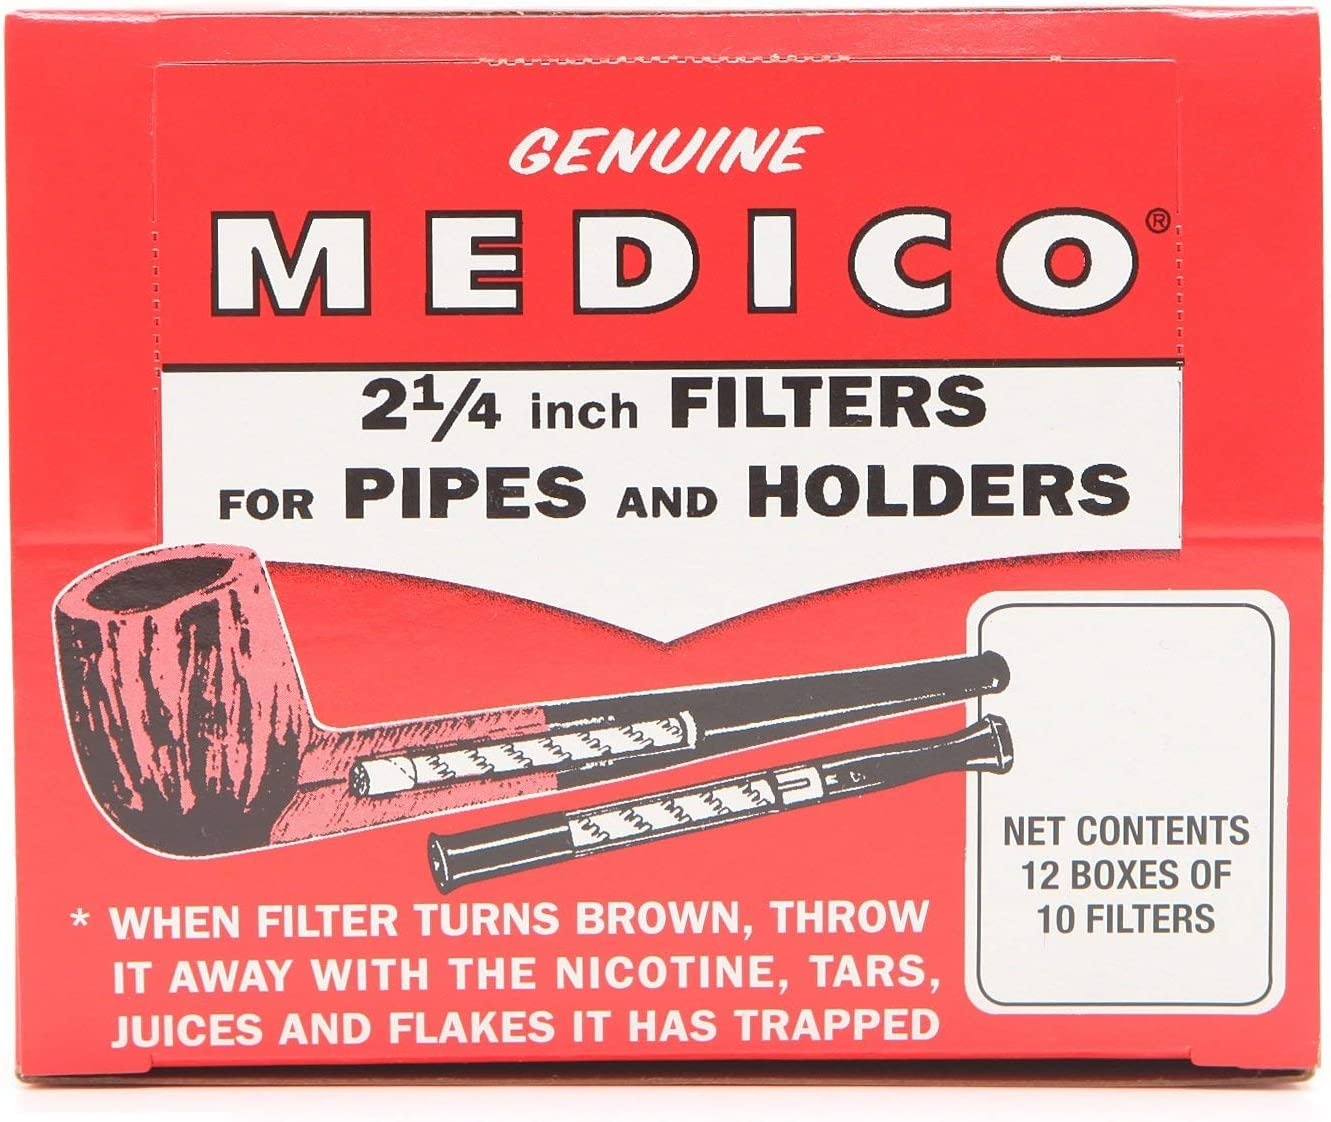 Pipe Filters - 12 Boxes of 10